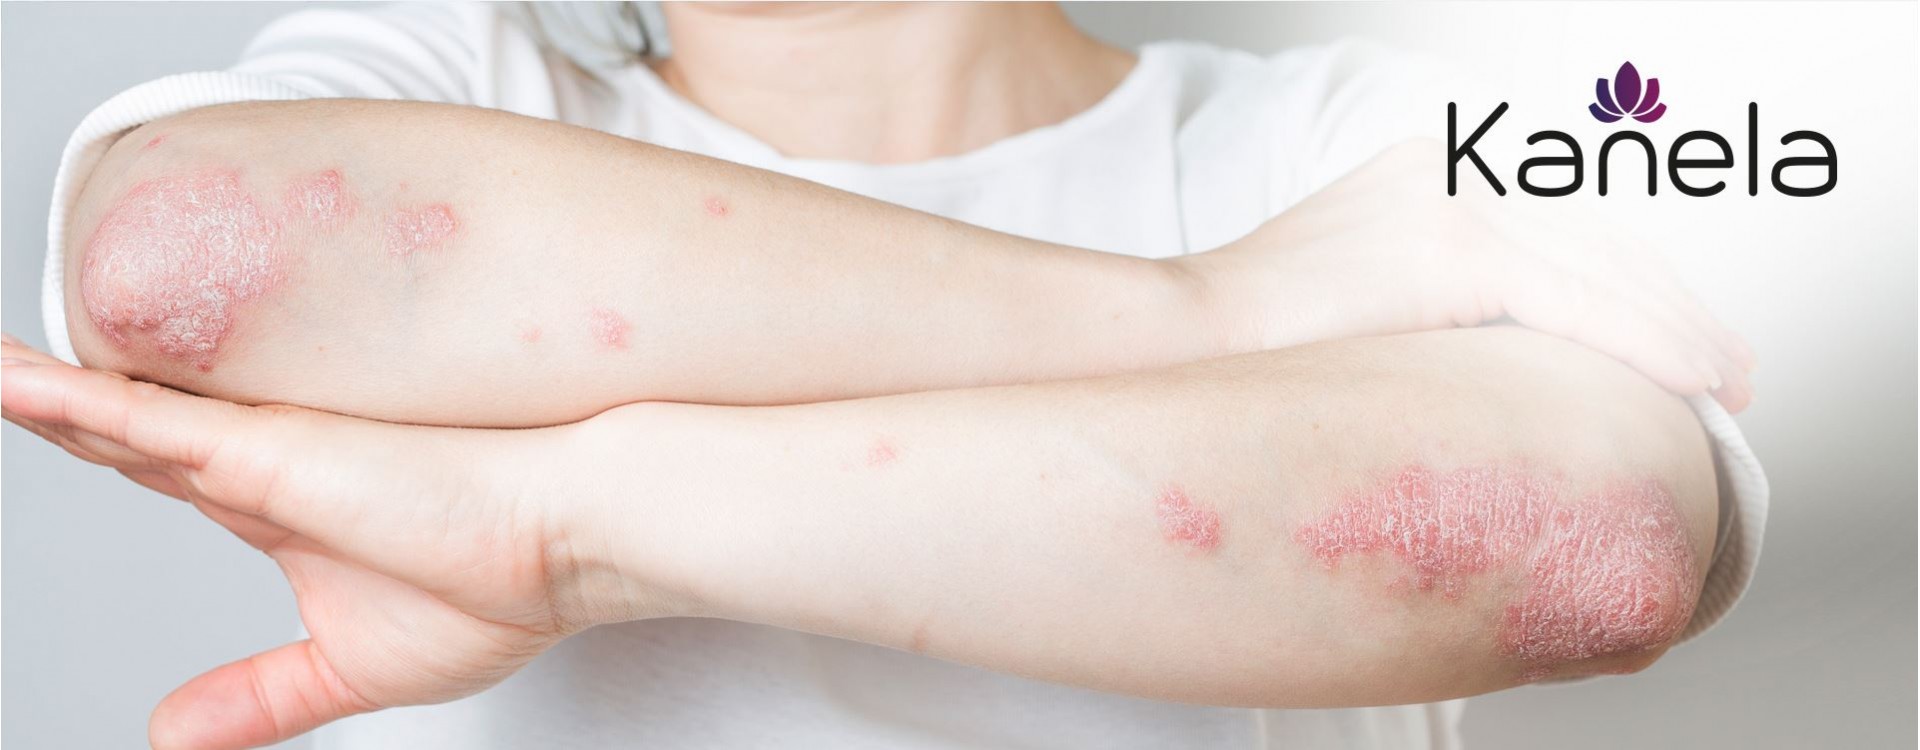 What helps against psoriasis?